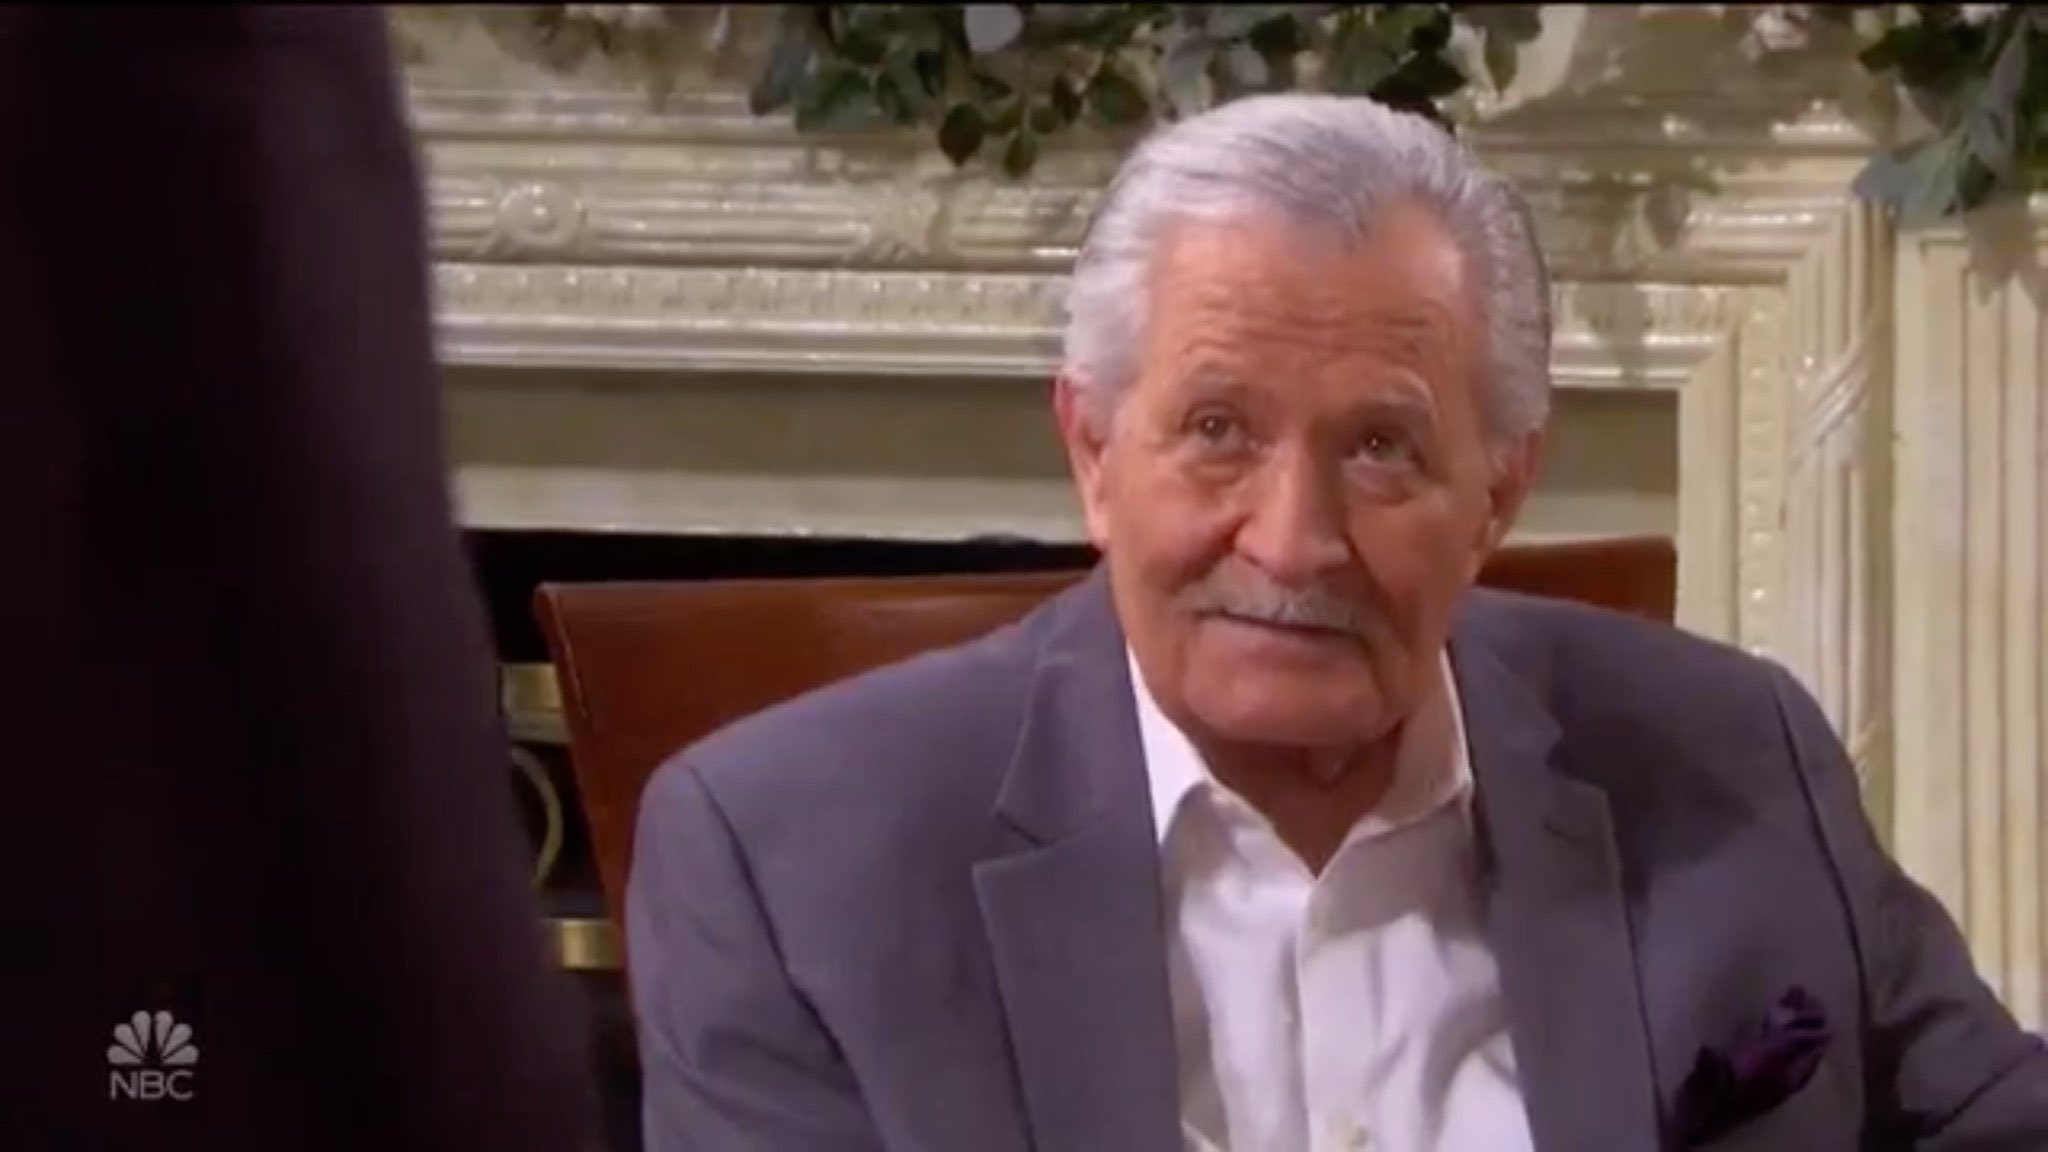 Wishing a very happy birthday to the incomparable, irrepressible, irreplaceable John Aniston! 